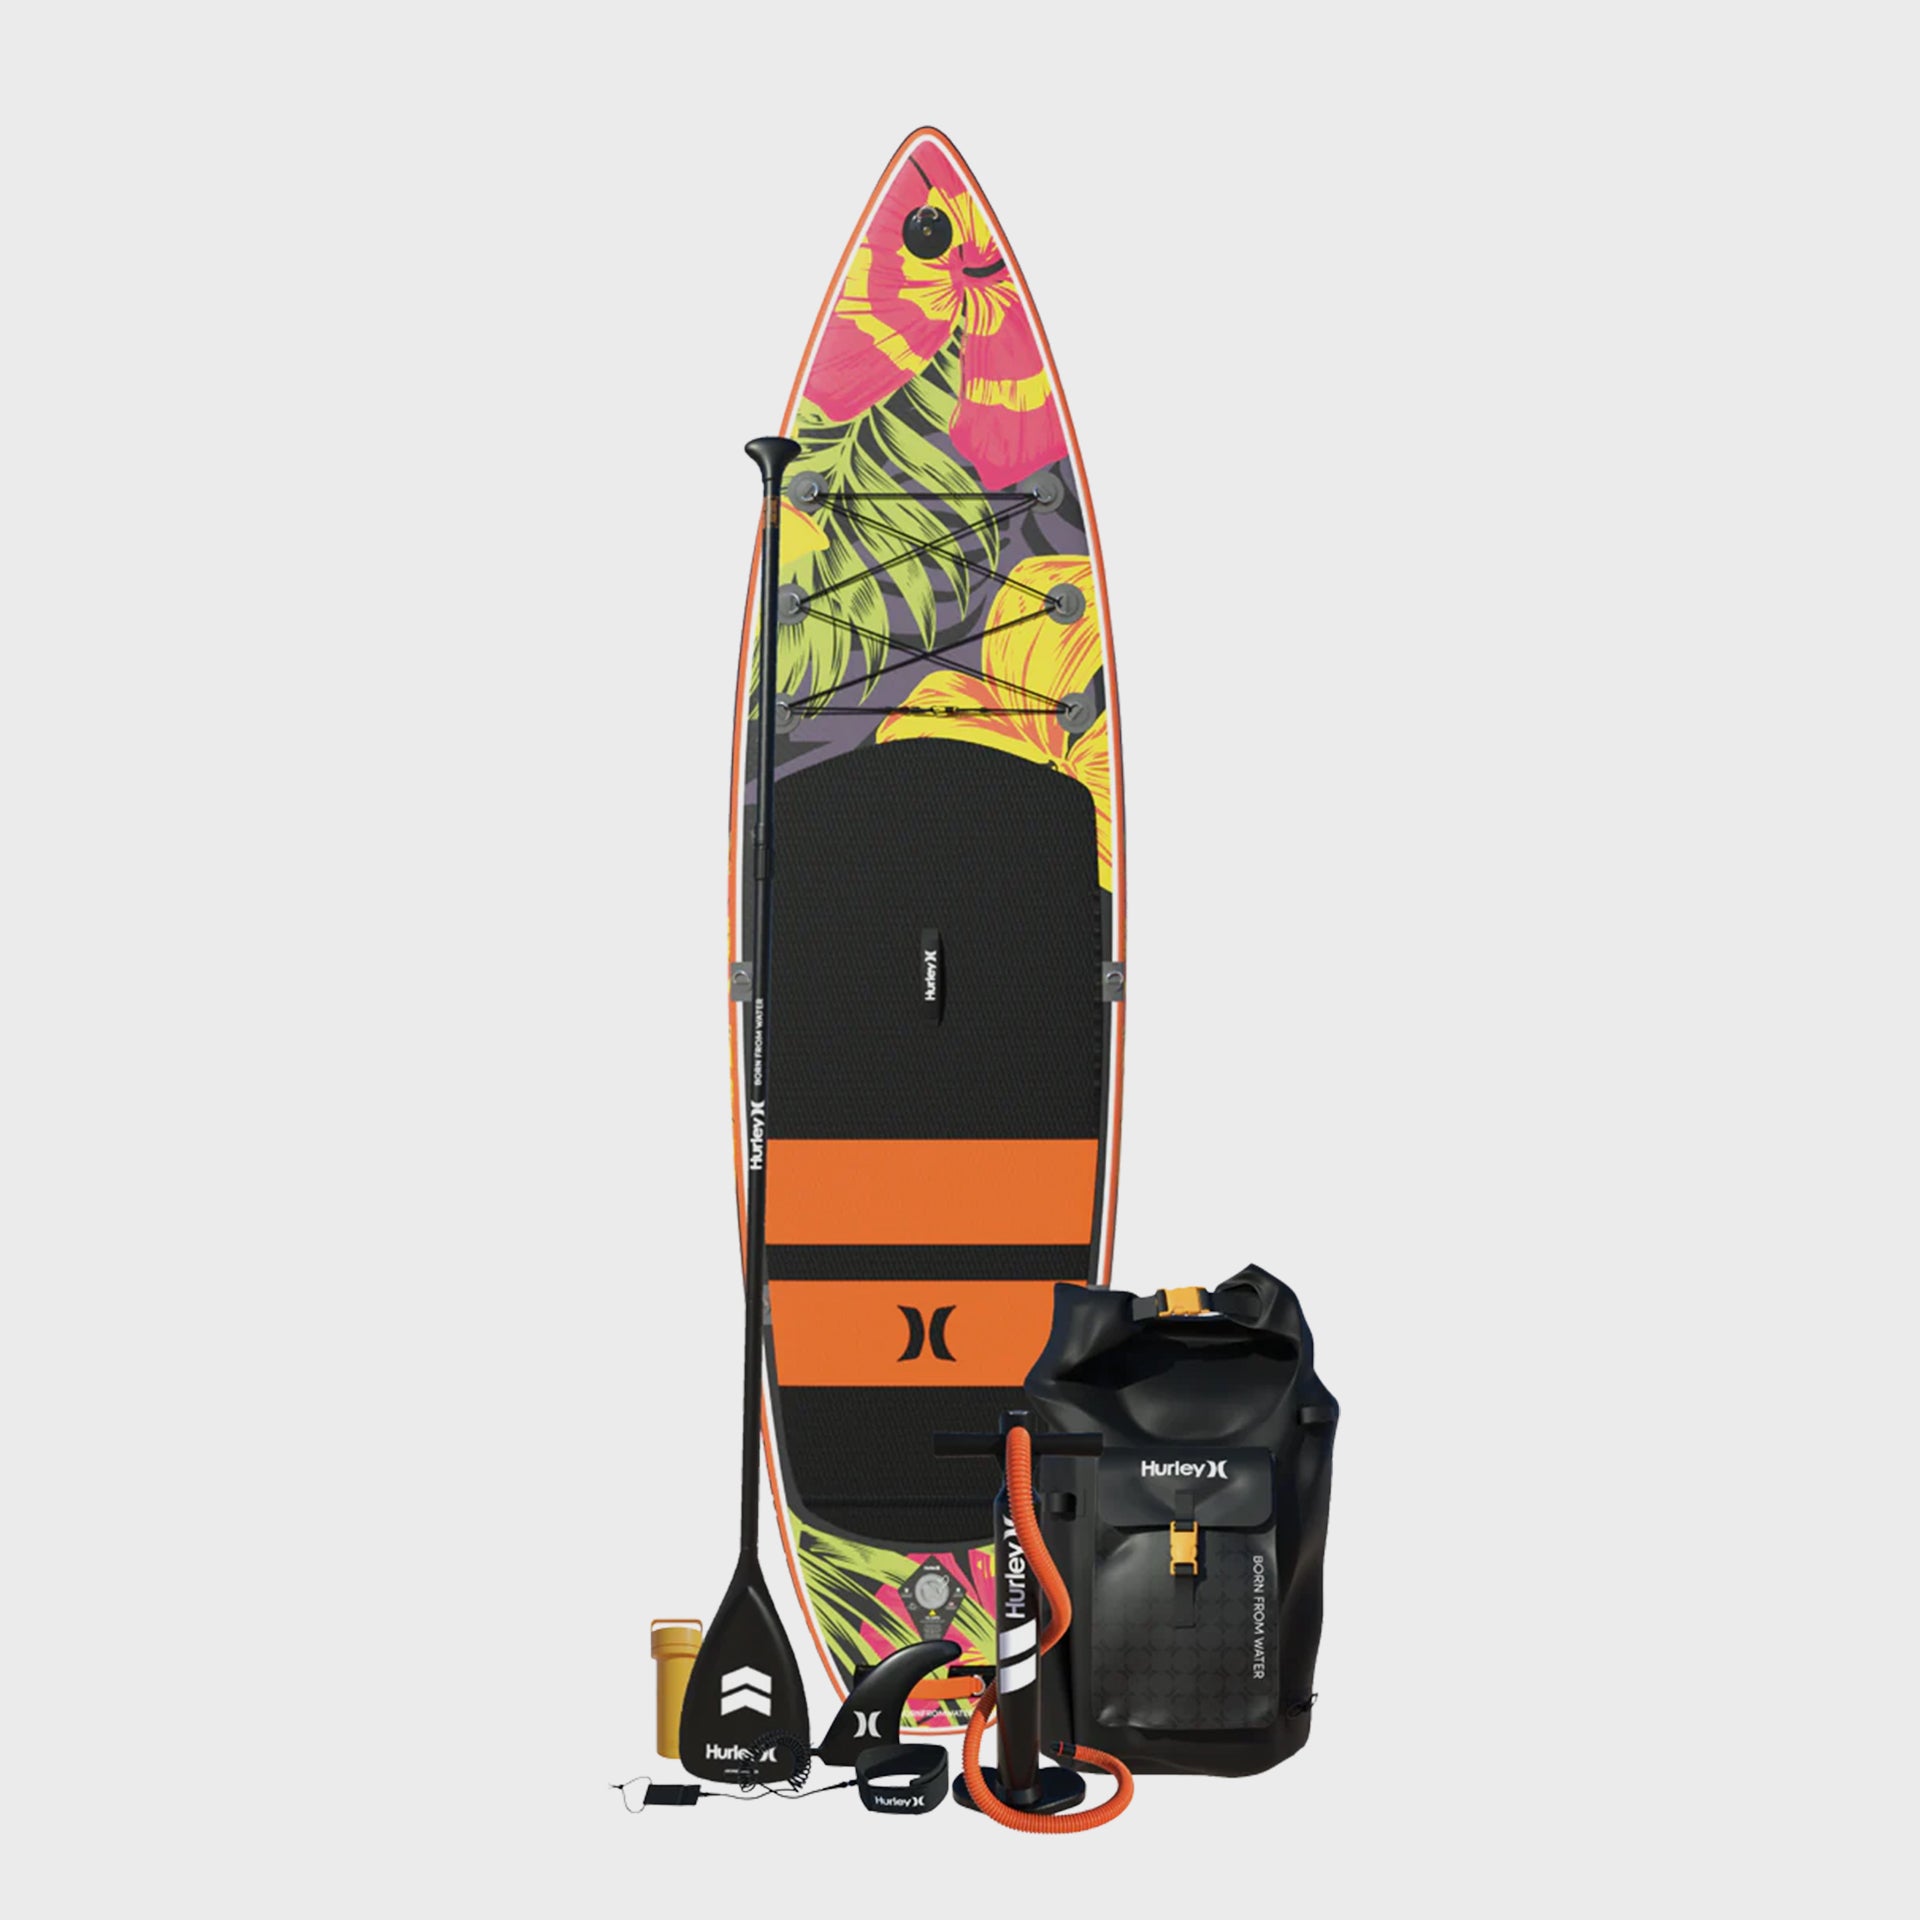 Hurley ApexTour Inflatable Paddleboard - 10'8 - Midnight Tropics - ManGo Surfing